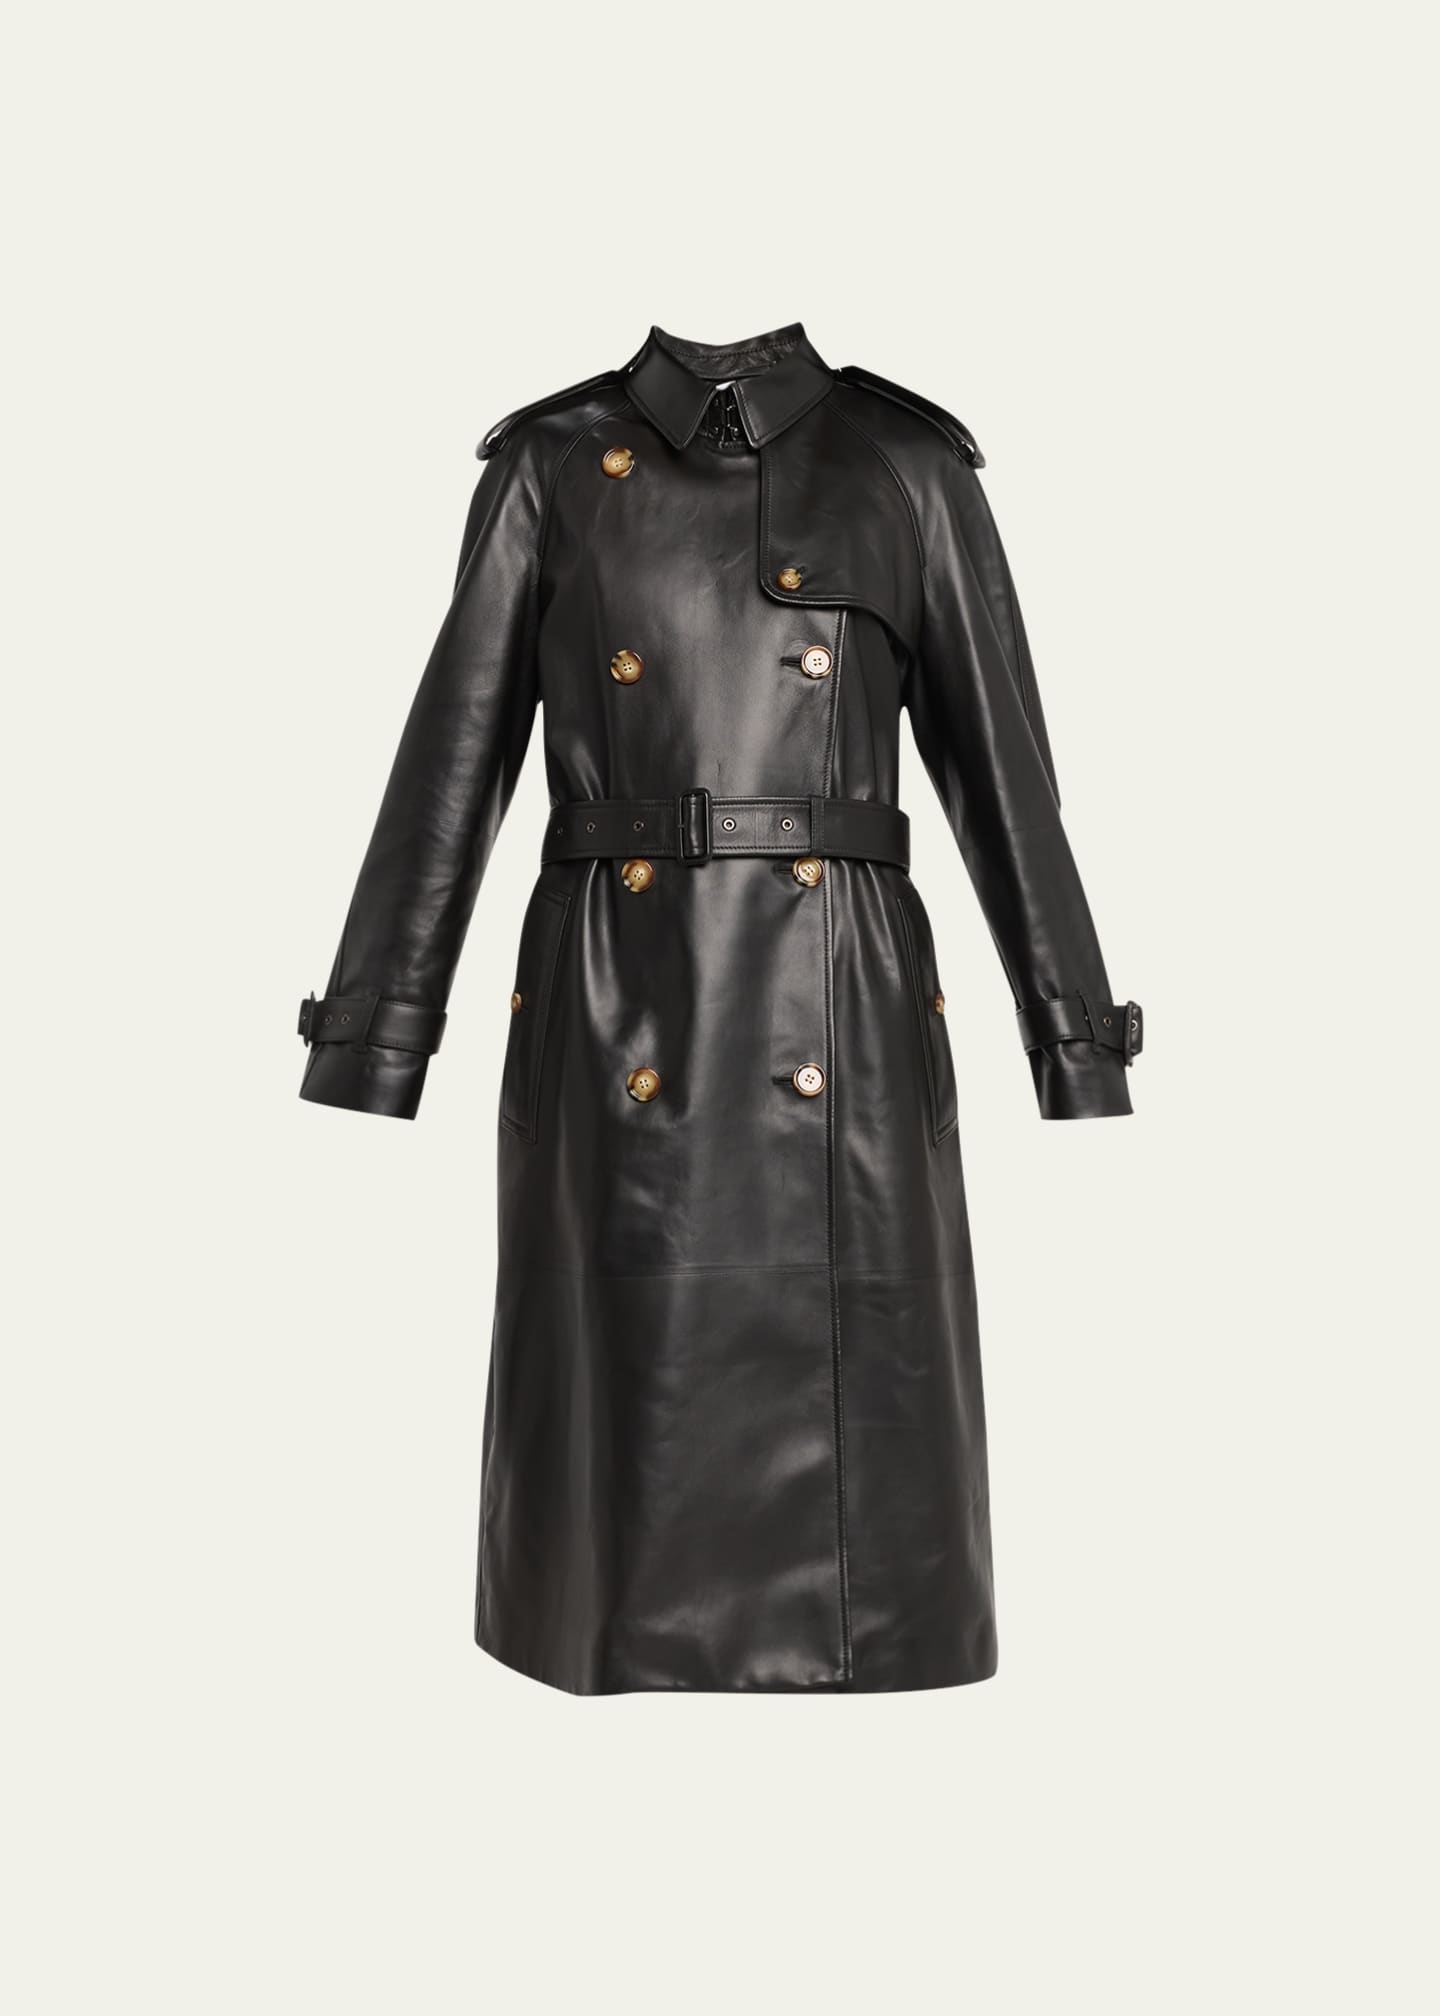 Burberry Harehope Belted Leather Trench Coat - Bergdorf Goodman